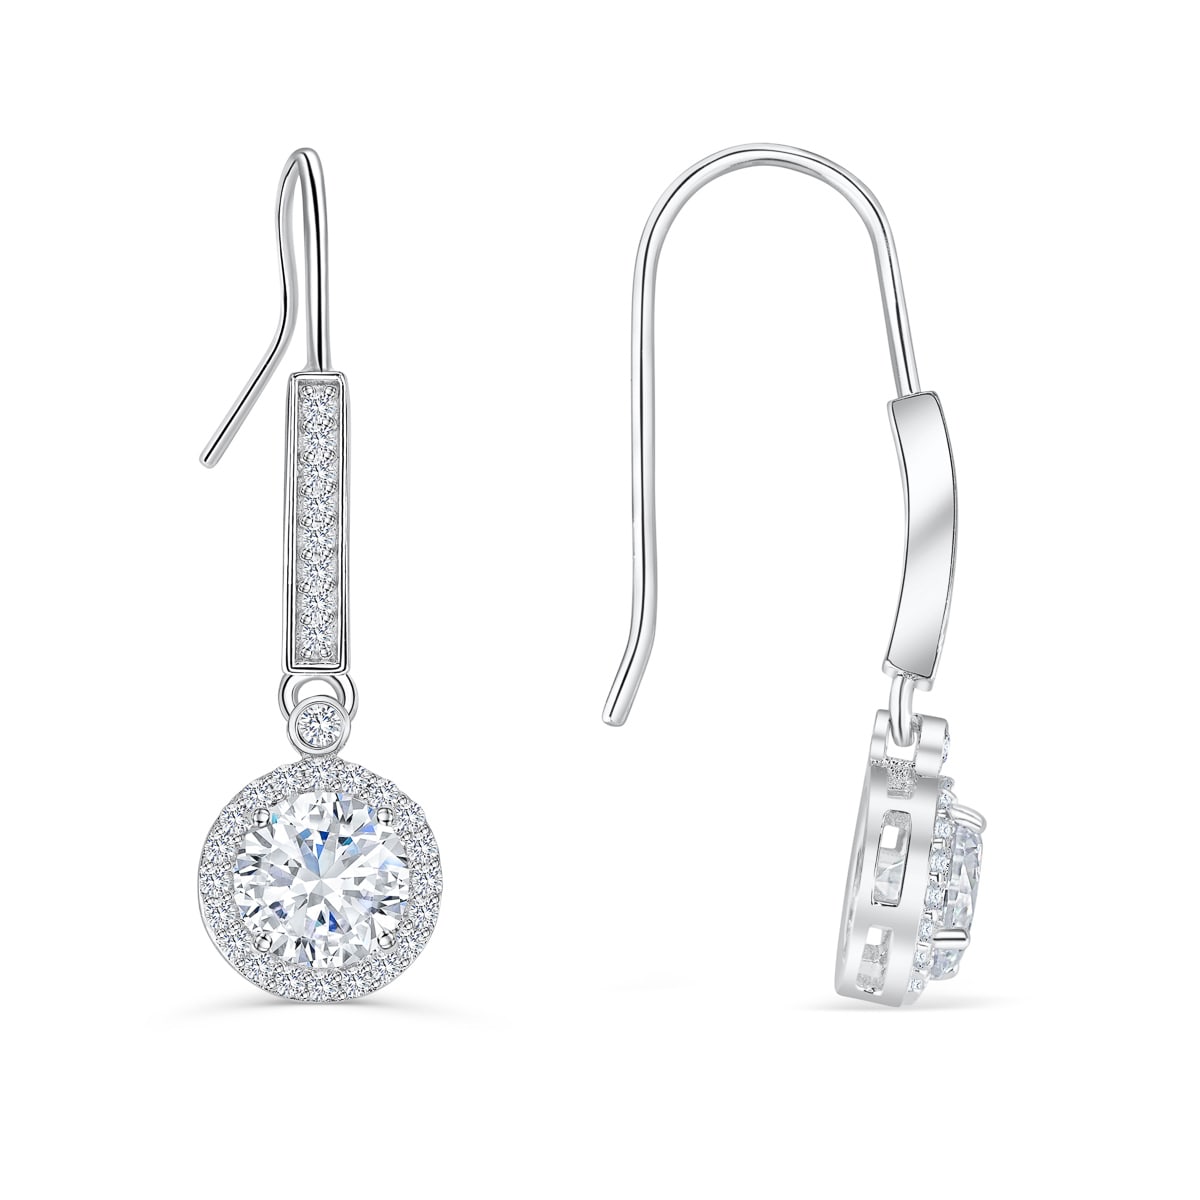 the blossom silver earrings